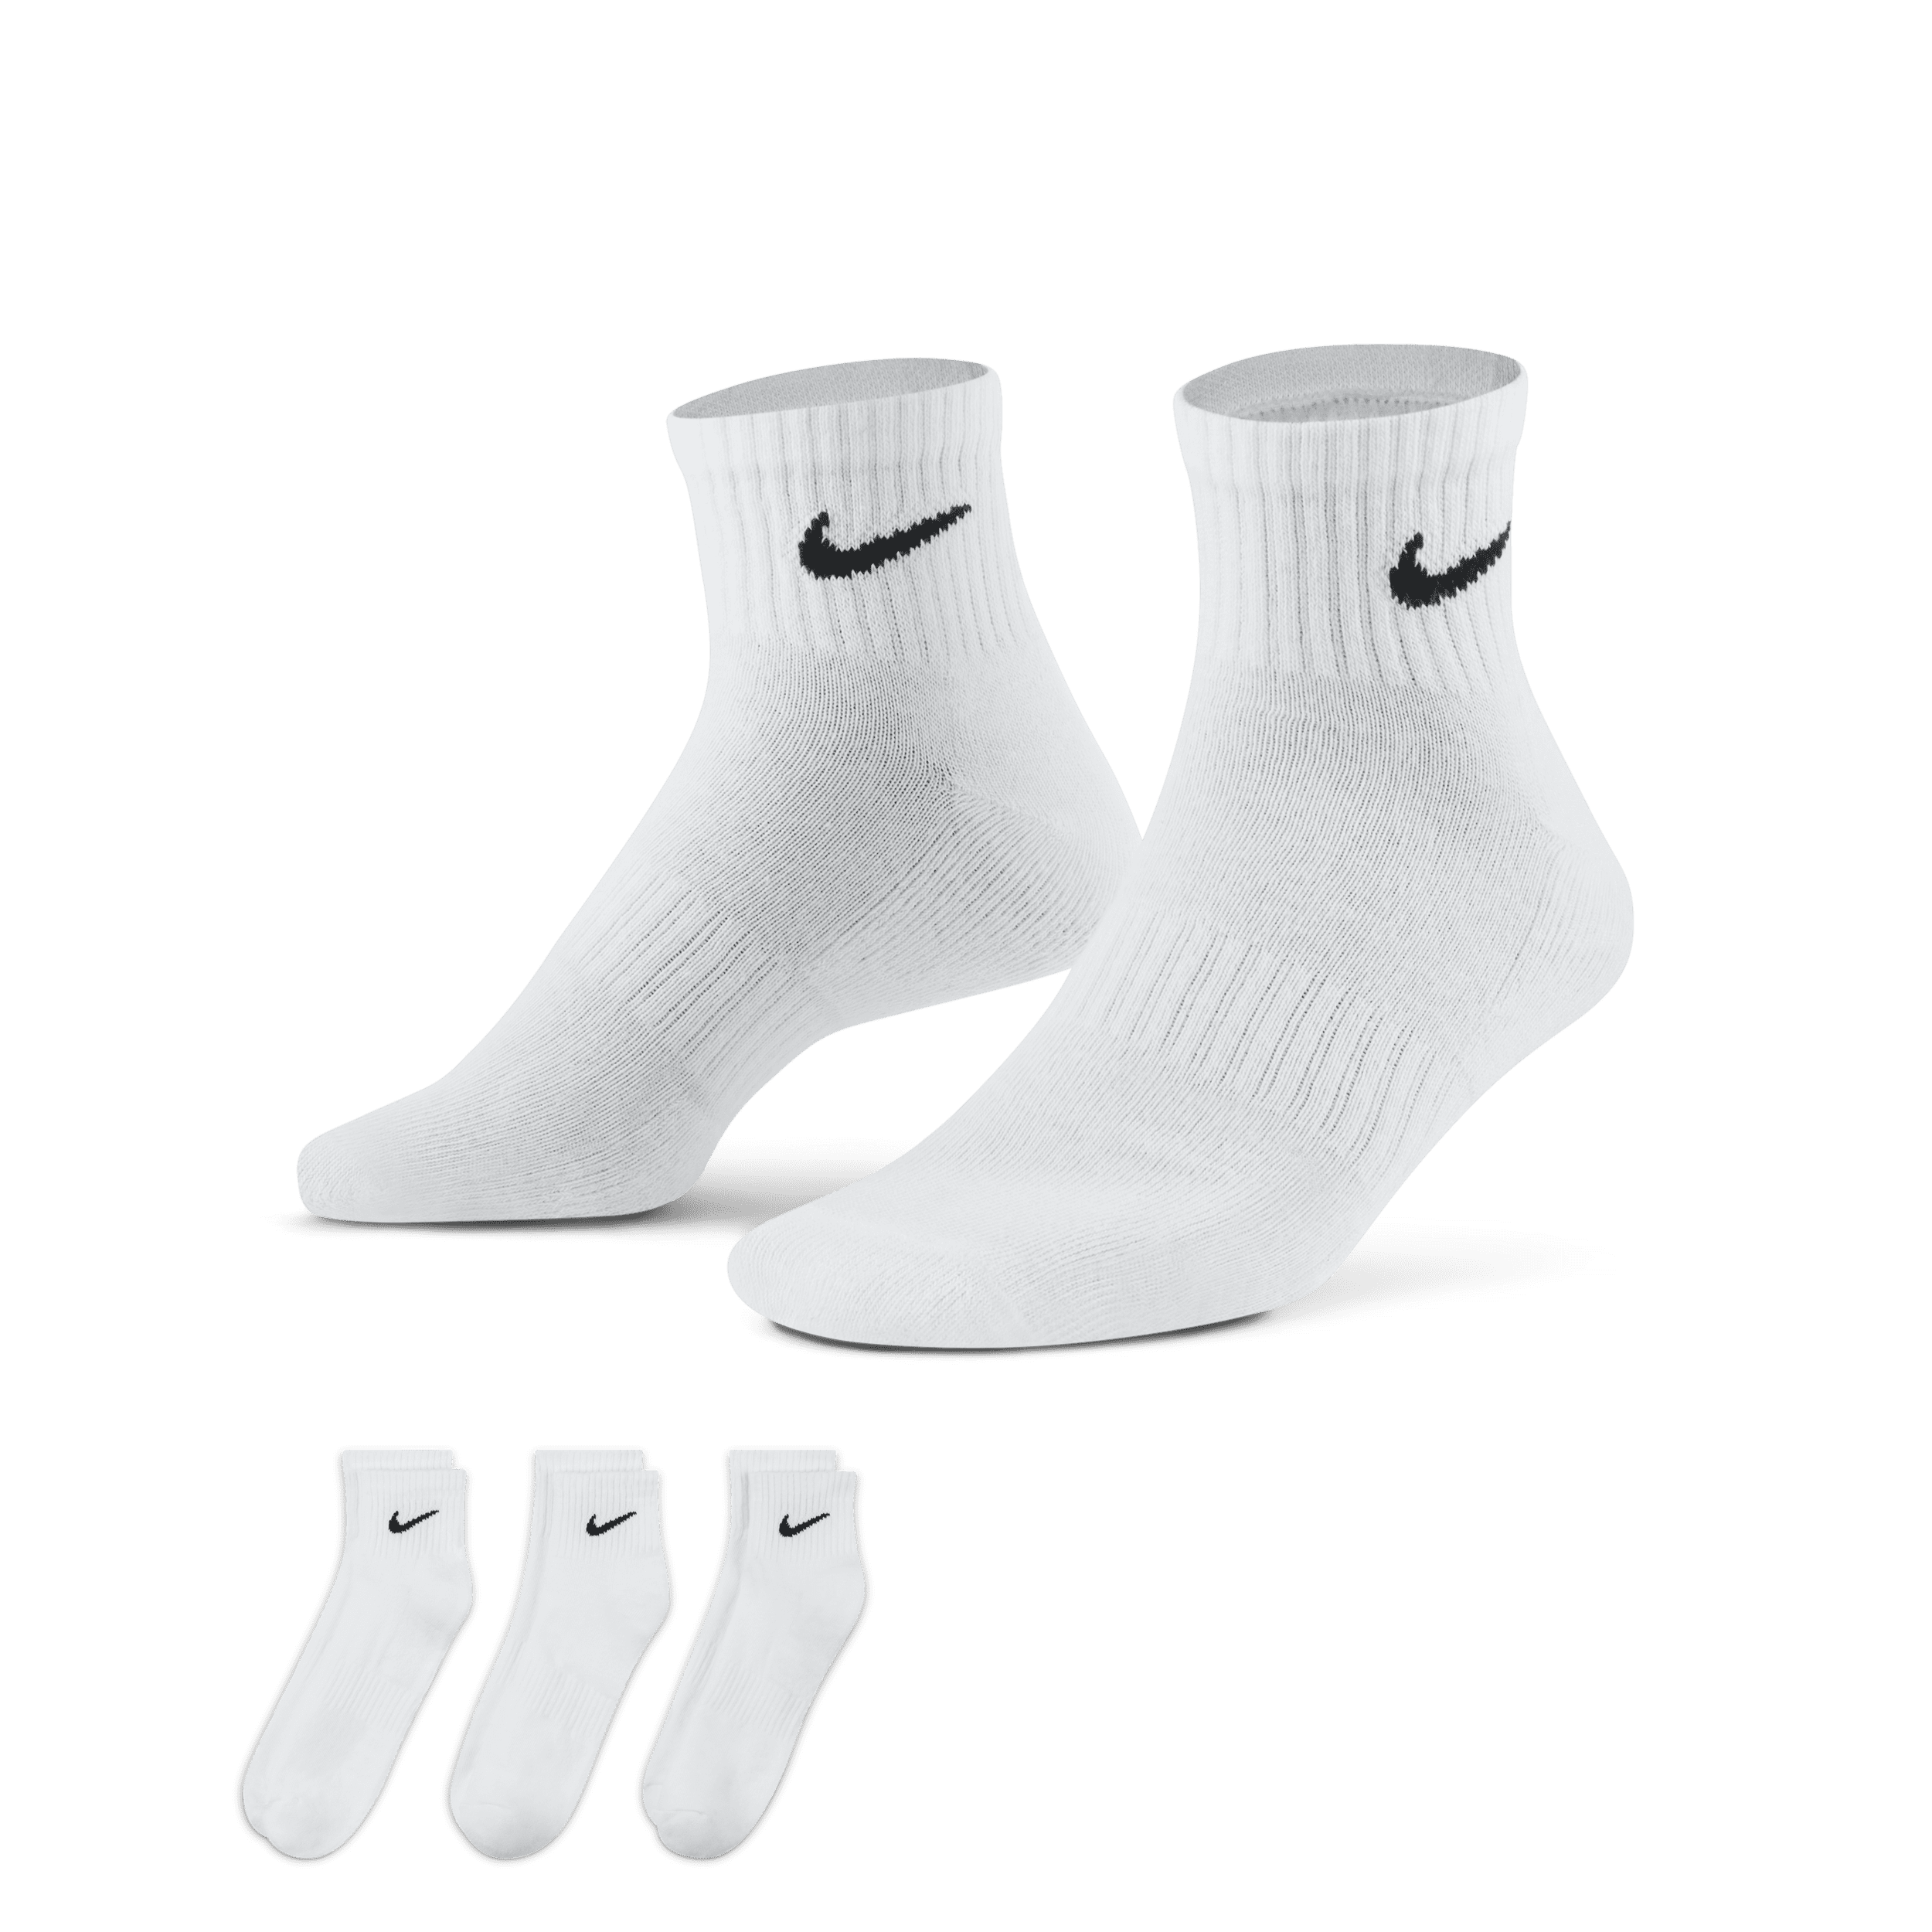 Power through your workout with the Nike Everyday Cushioned Socks. The thick terry sole gives you extra comfort for foot drills and lifts, while a ribbed arch band wraps your midfoot for a supportive feel. Dri-FIT Technology helps keep your feet dry and comfortable.Thick terry sole offers comfort and impact absorption.Ribbed arch band provides a supportive feel.1/4-length silhouette covers your ankle.Fabric: 71% cotton/26% polyester/2% elastane/1% nylonMachine washImported